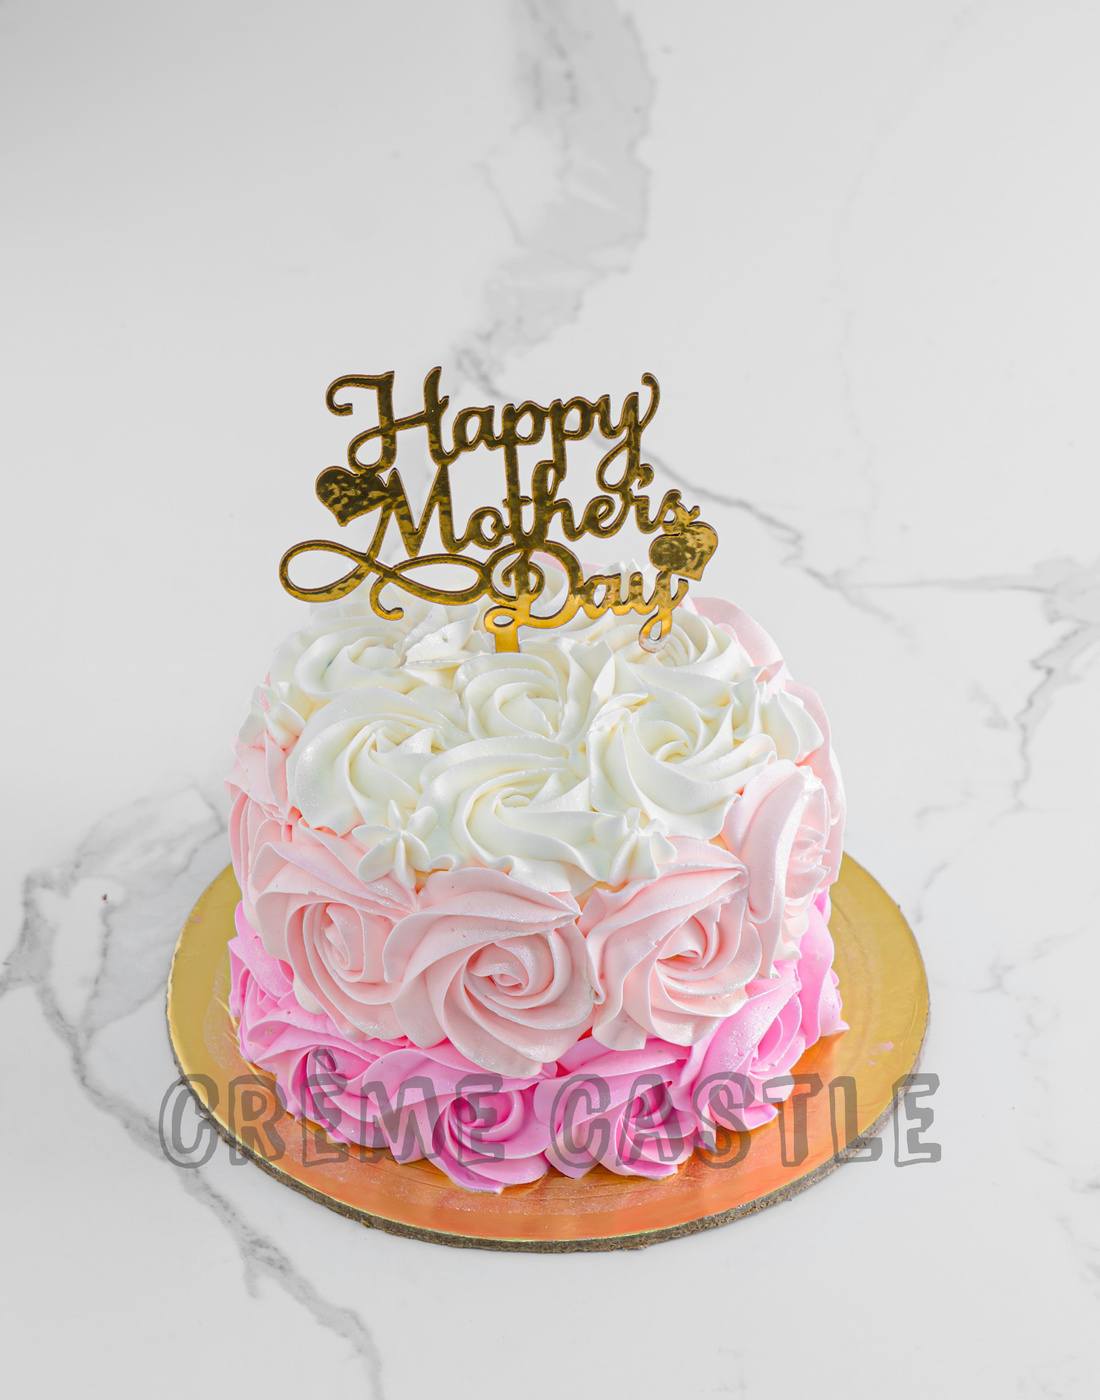 Rose Cake Next Day Delivery | Patisserie Valerie